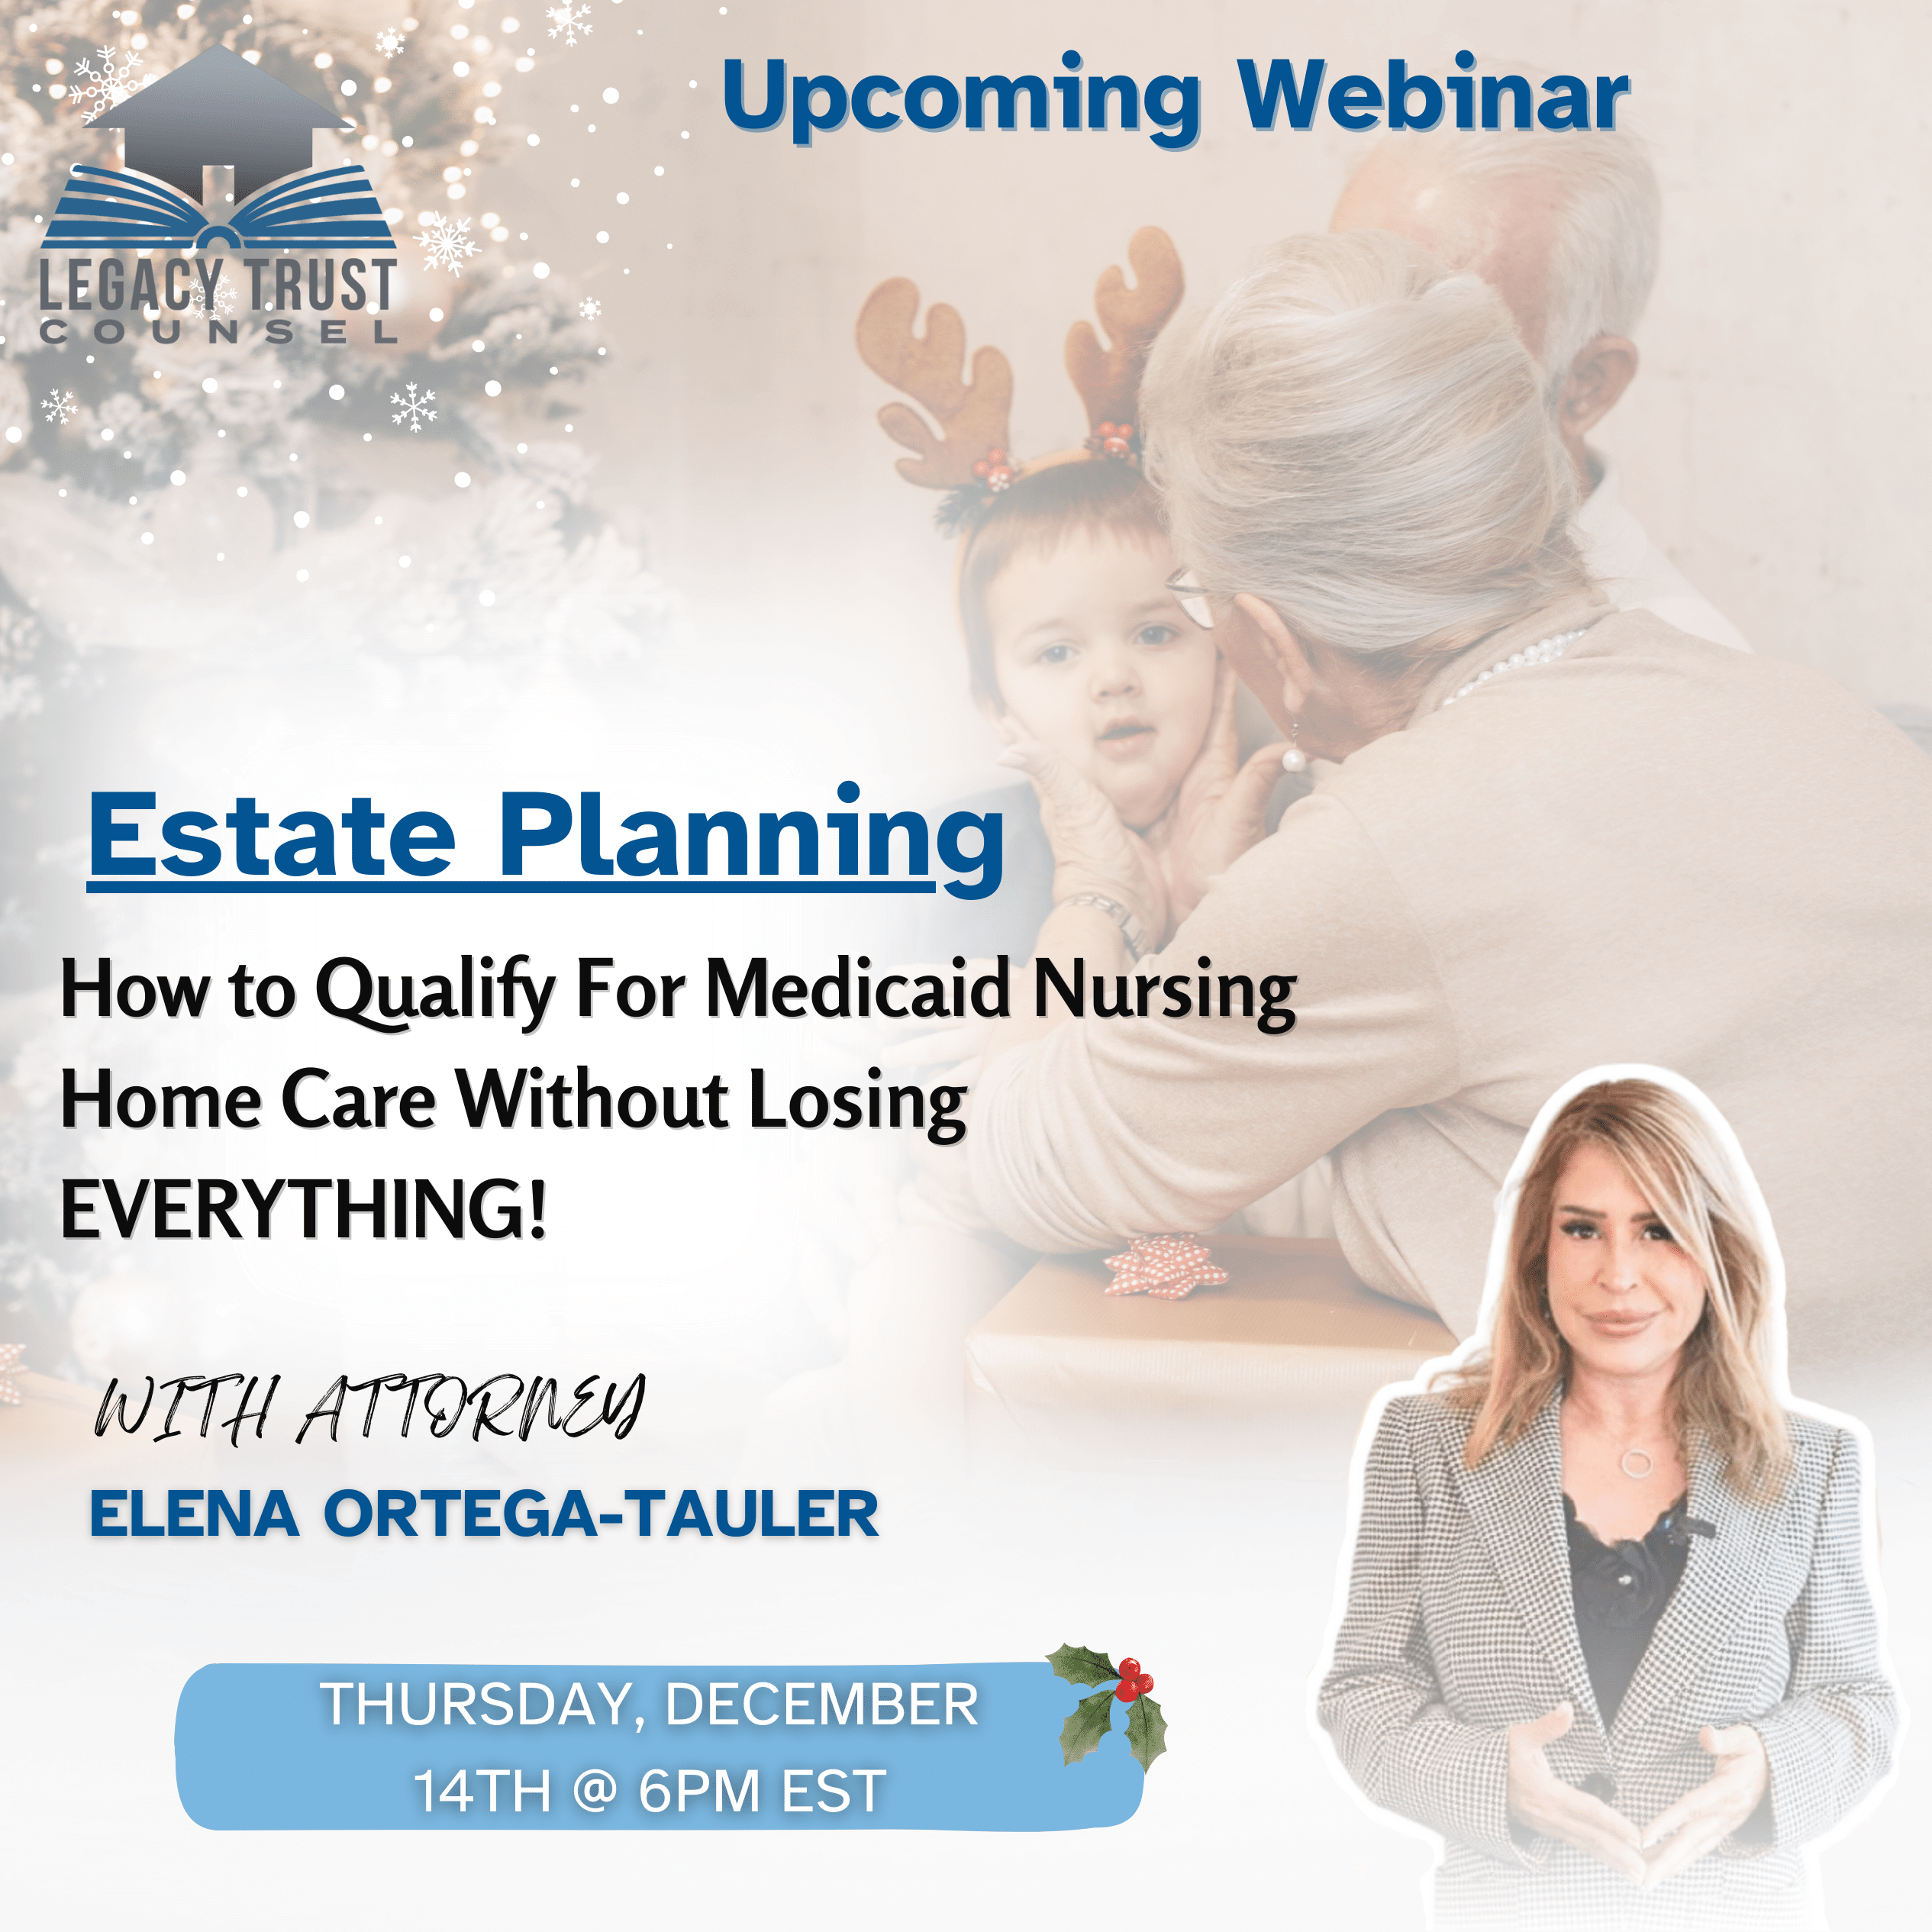 Legacy Trust Counsel Estate Planning: How To Qualify For Medicaid Nursing Home Care Without Losing EVERYTHING!